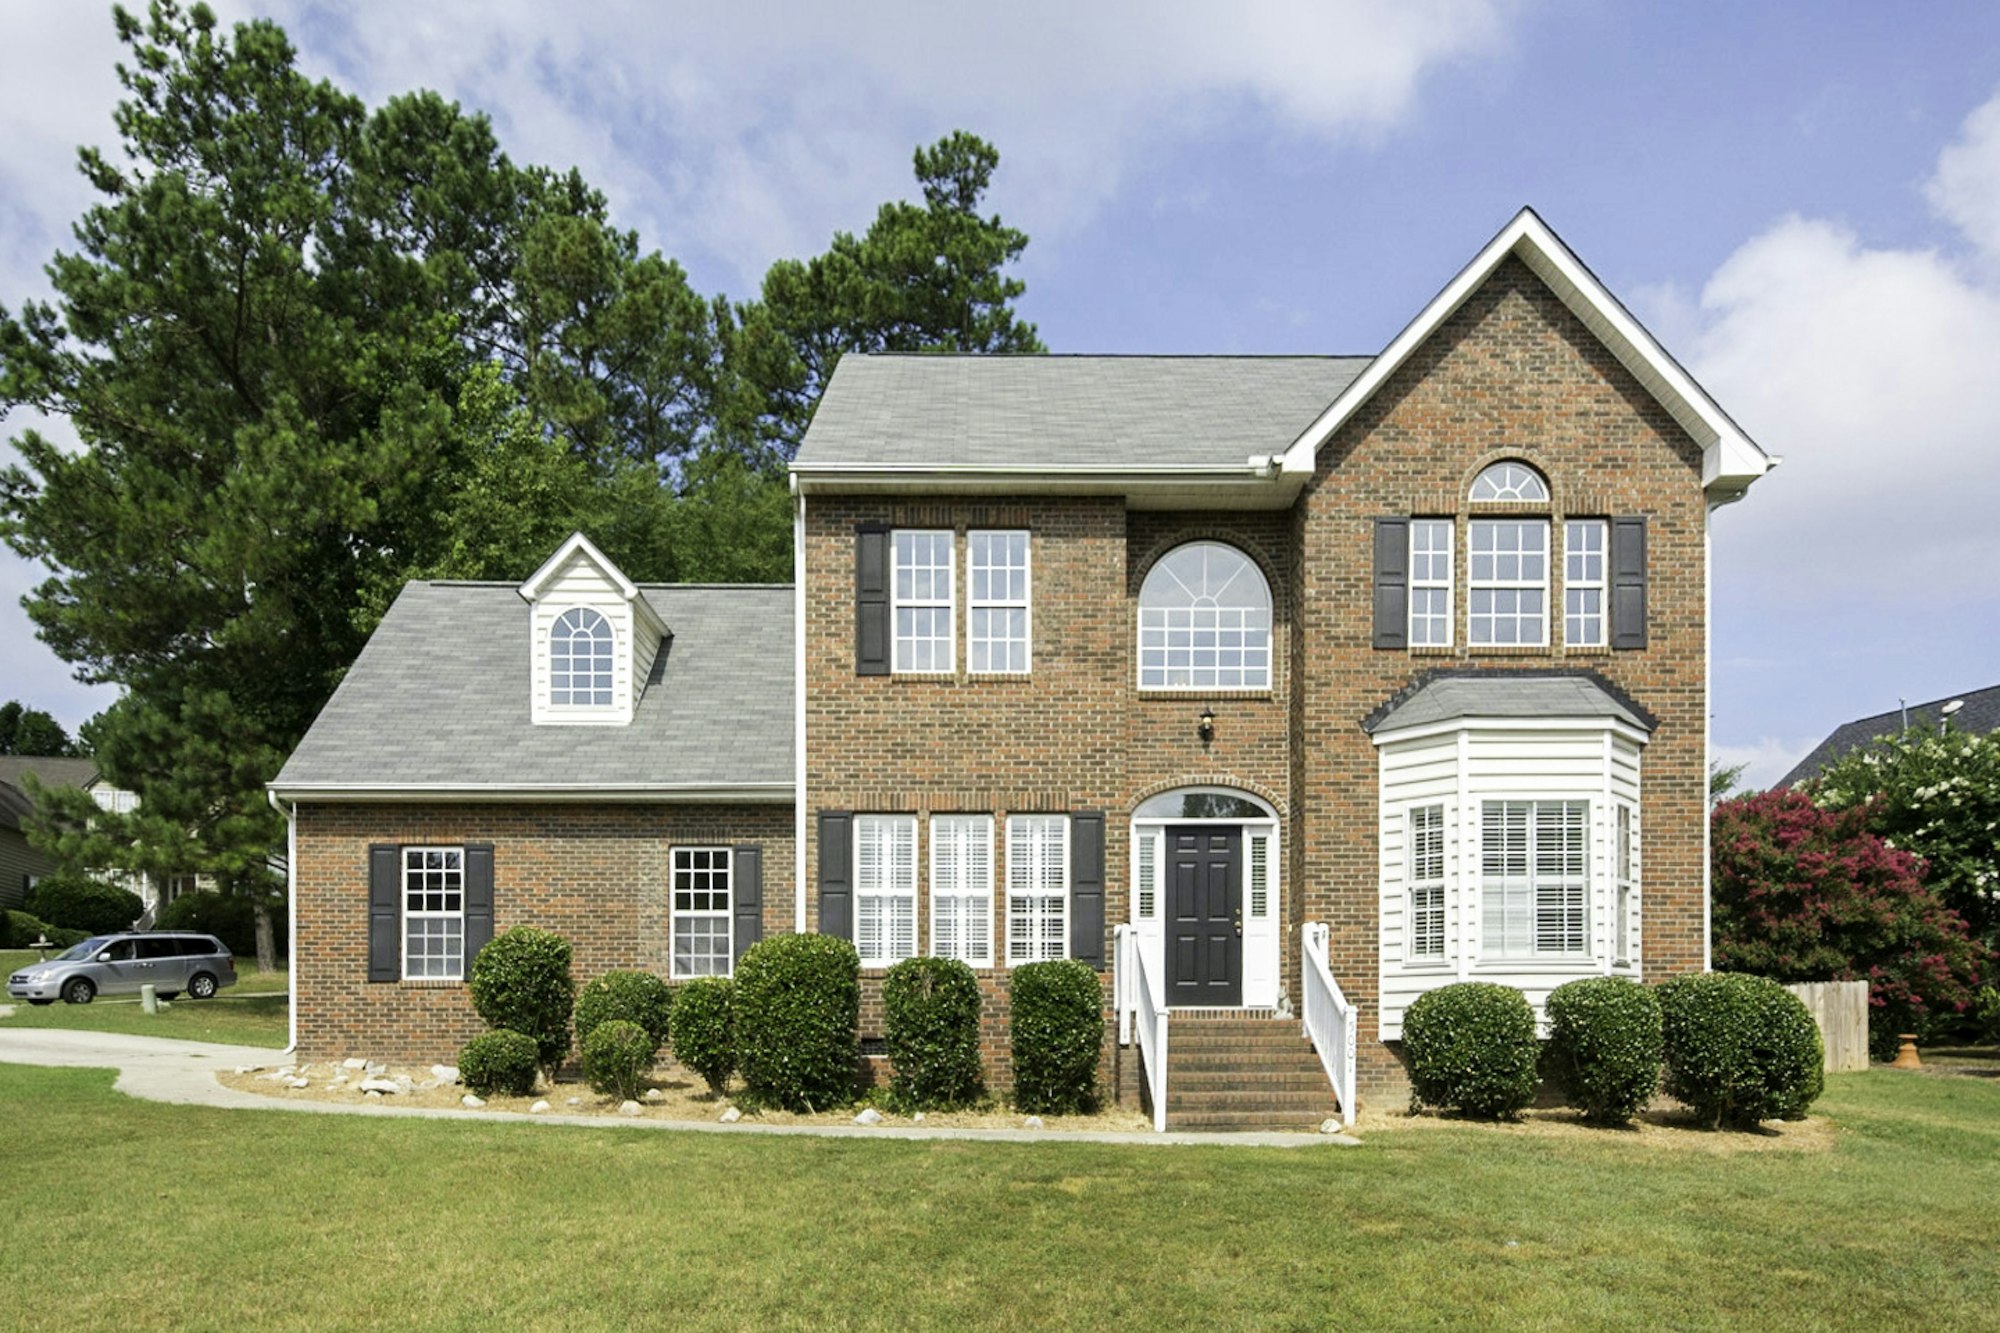 Photo 1 of 24 - 5001 Arbor Chase Dr, Raleigh, NC 27616